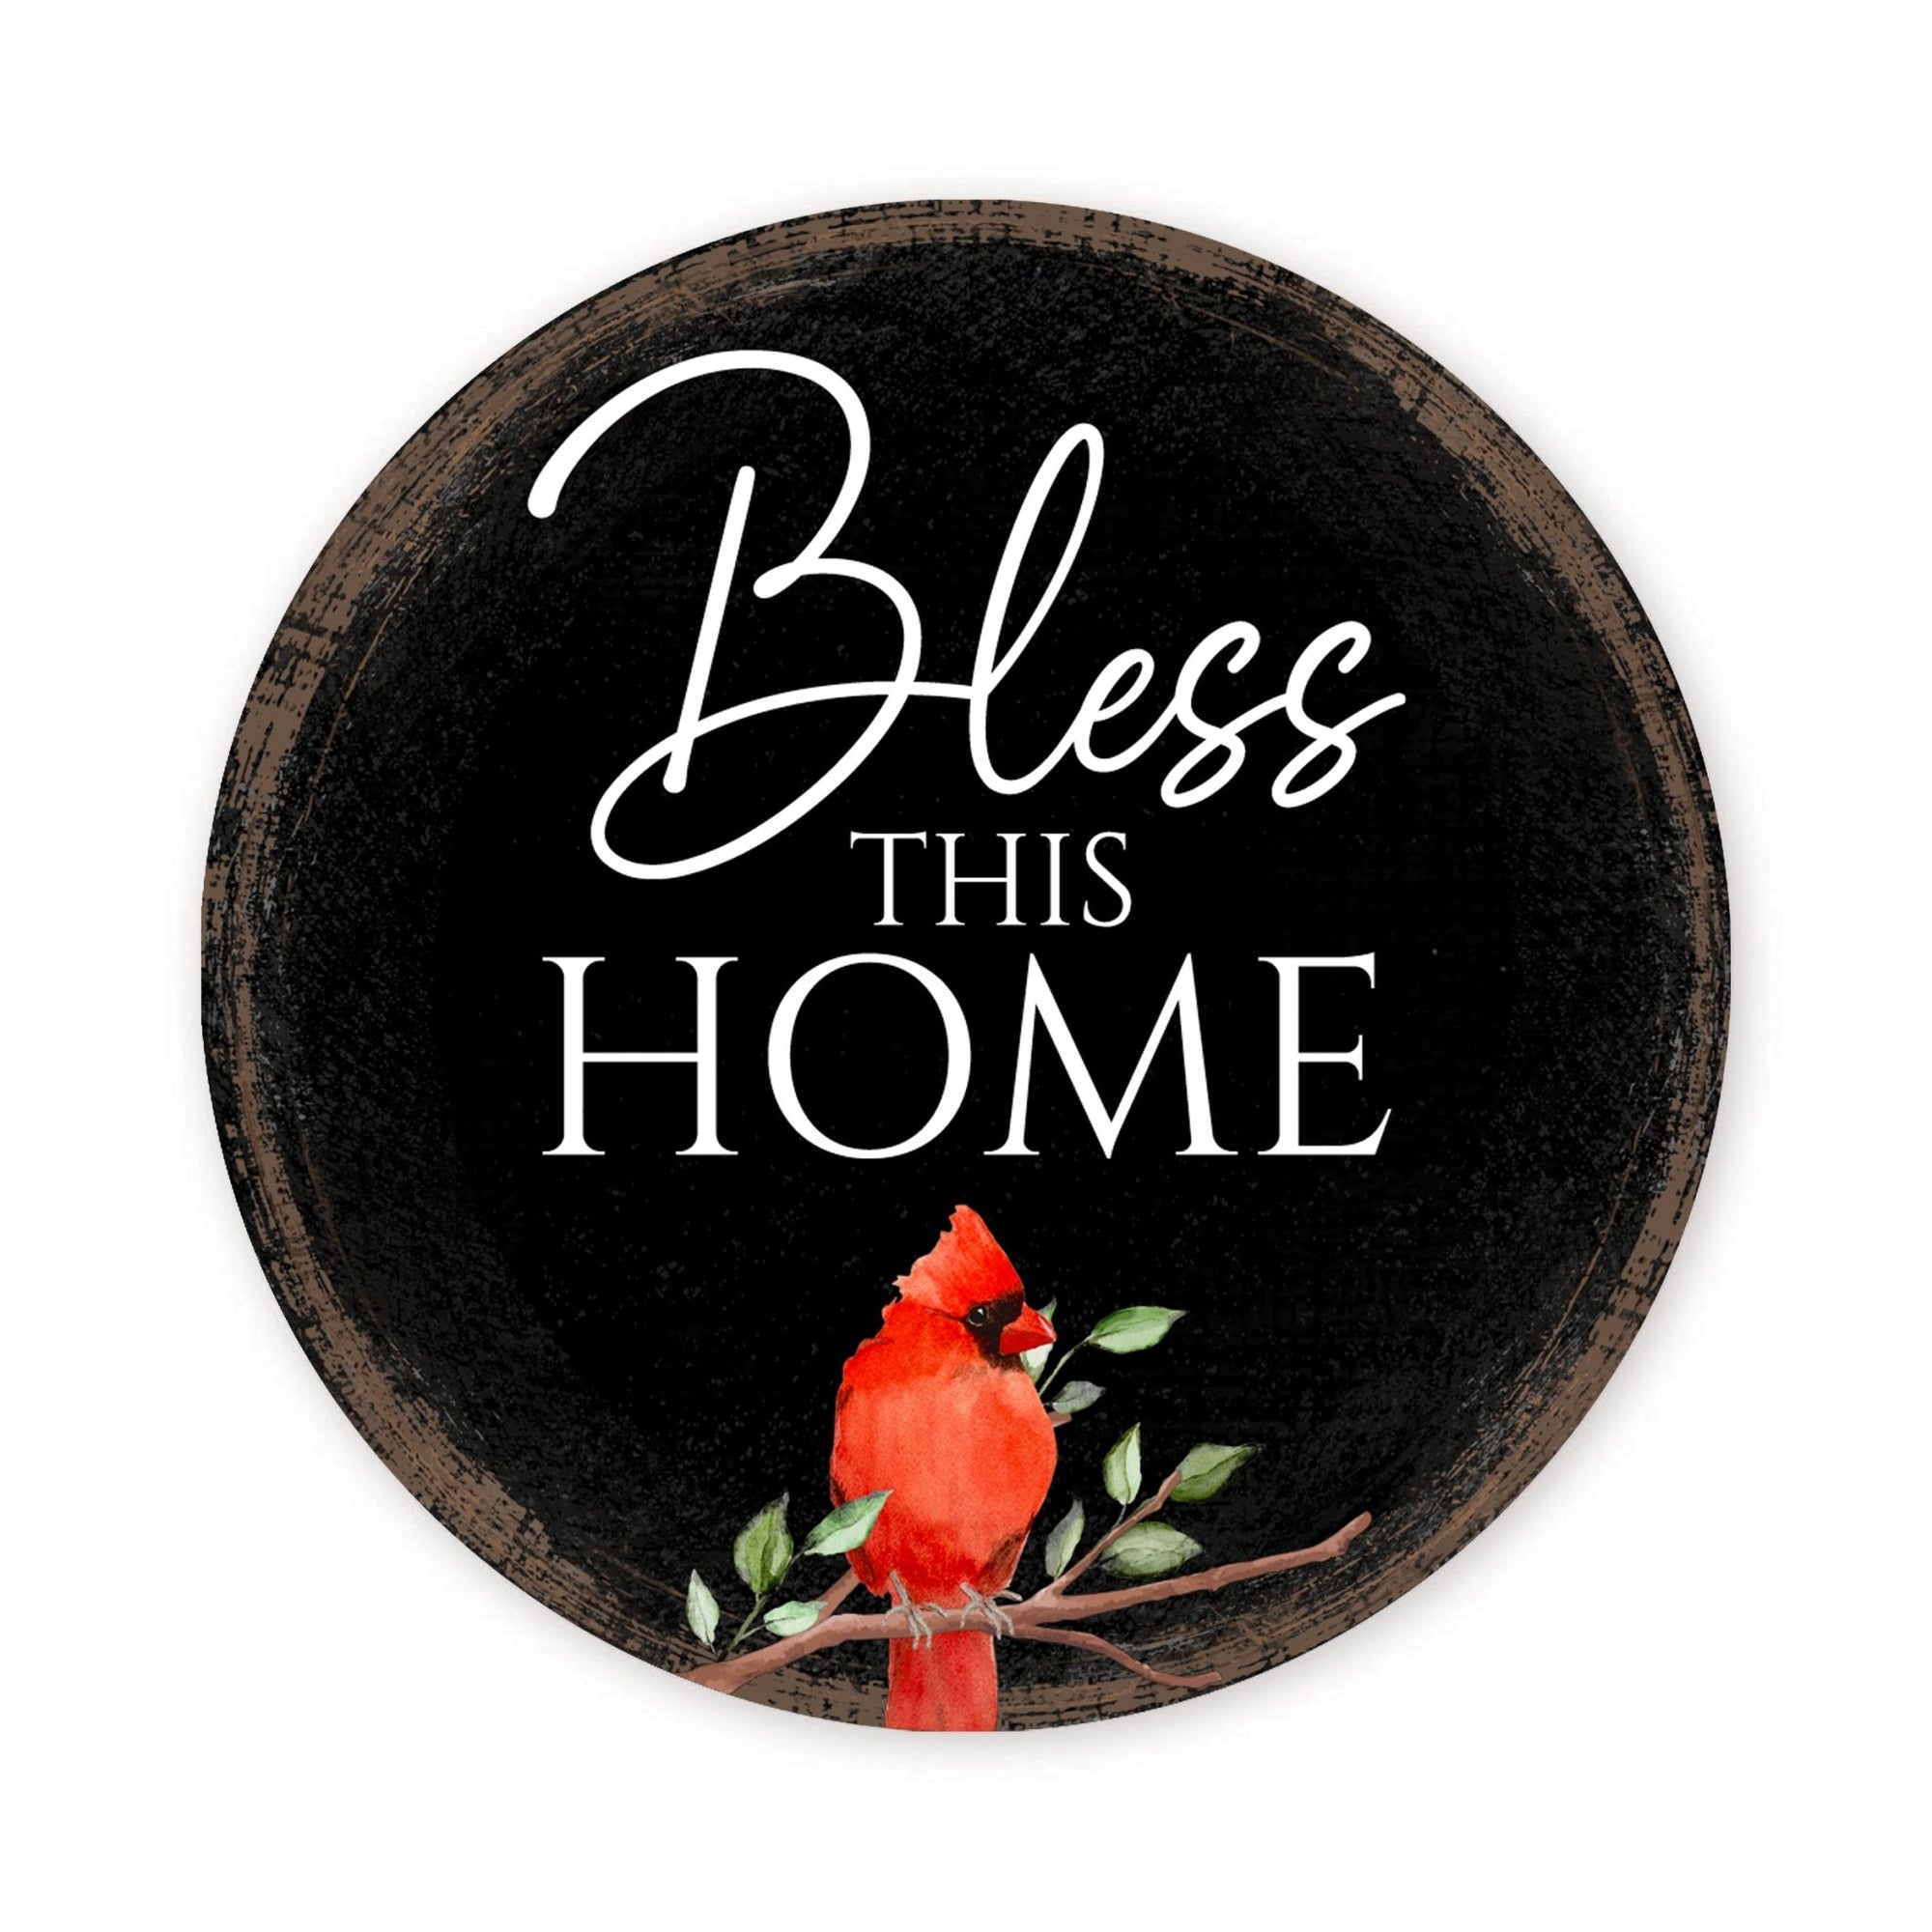 Vintage-Inspired Cardinal Wooden Magnet Printed With Everyday Inspirational Verses Gift Ideas - Bless This Home - LifeSong Milestones